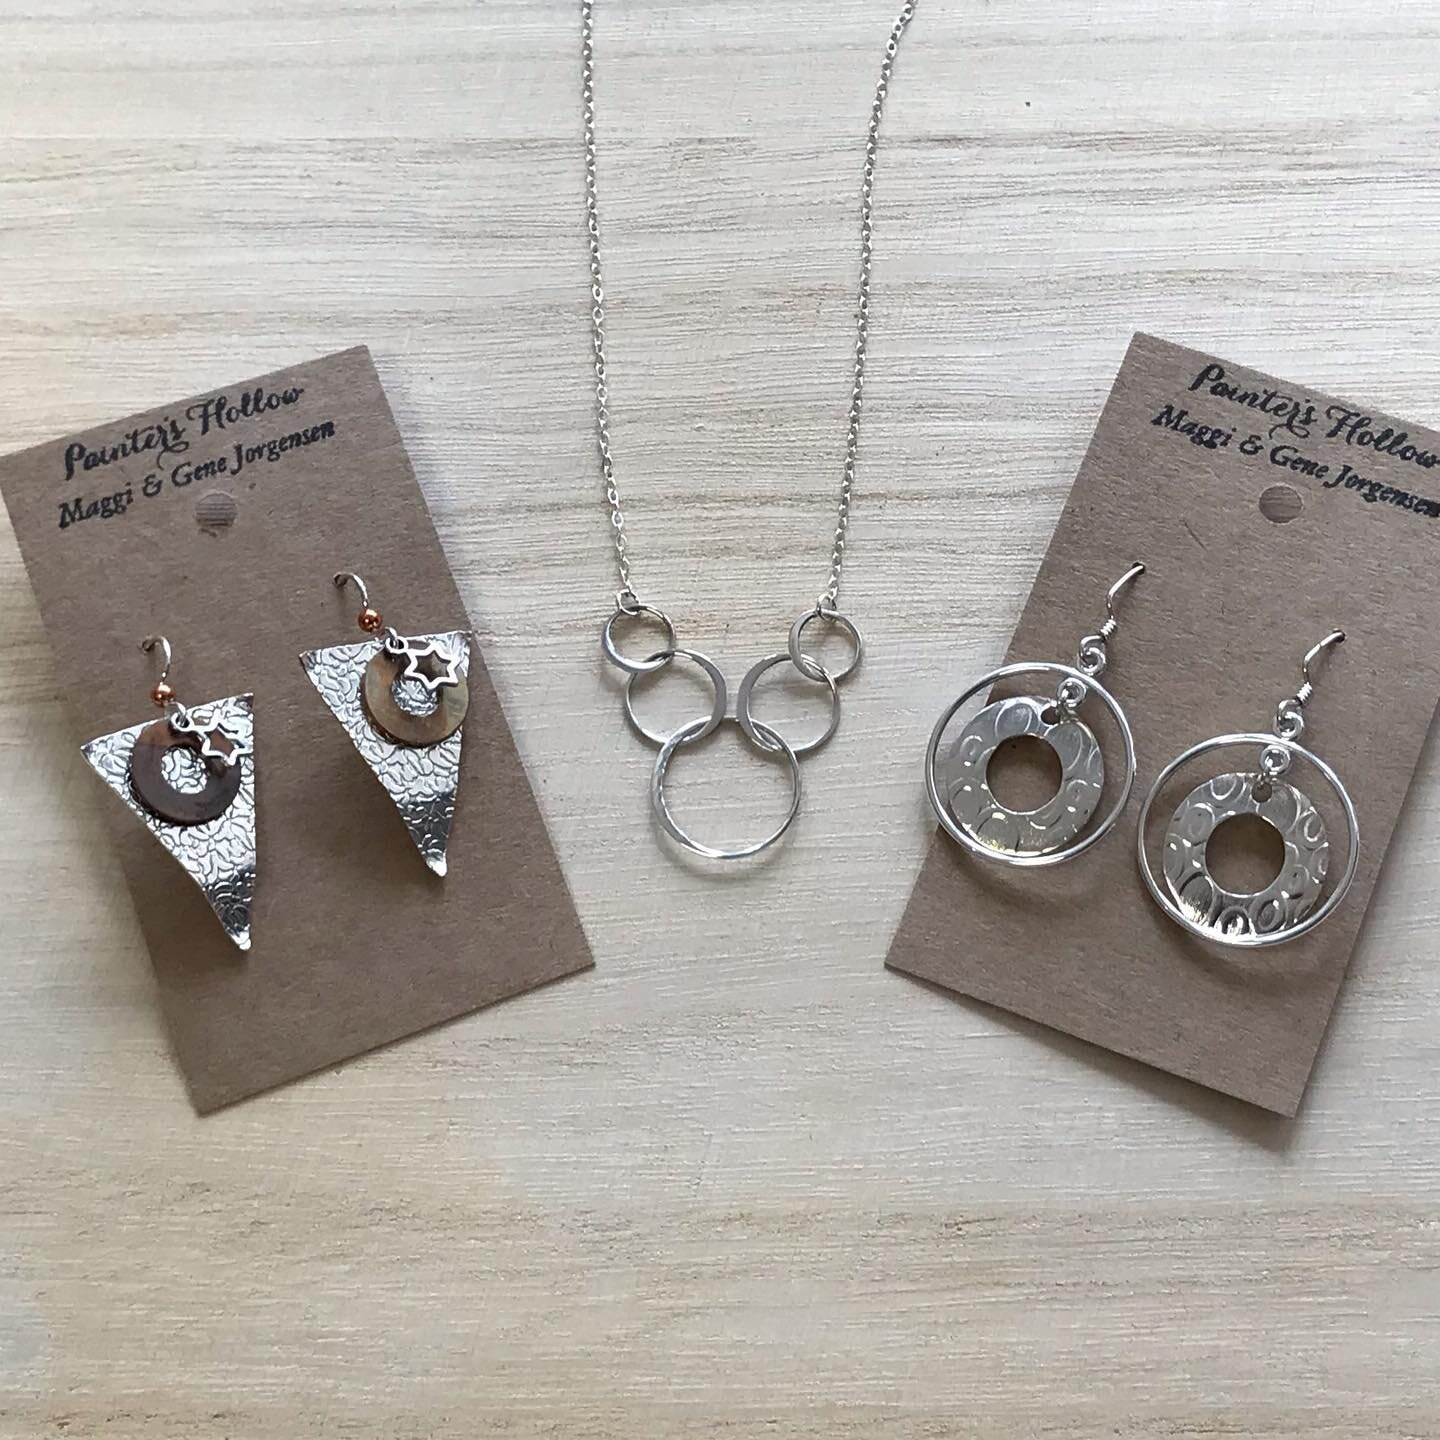 New sterling and copper jewelry from Painters Hollow! Maggi and Gene do beautiful work in fine metals!